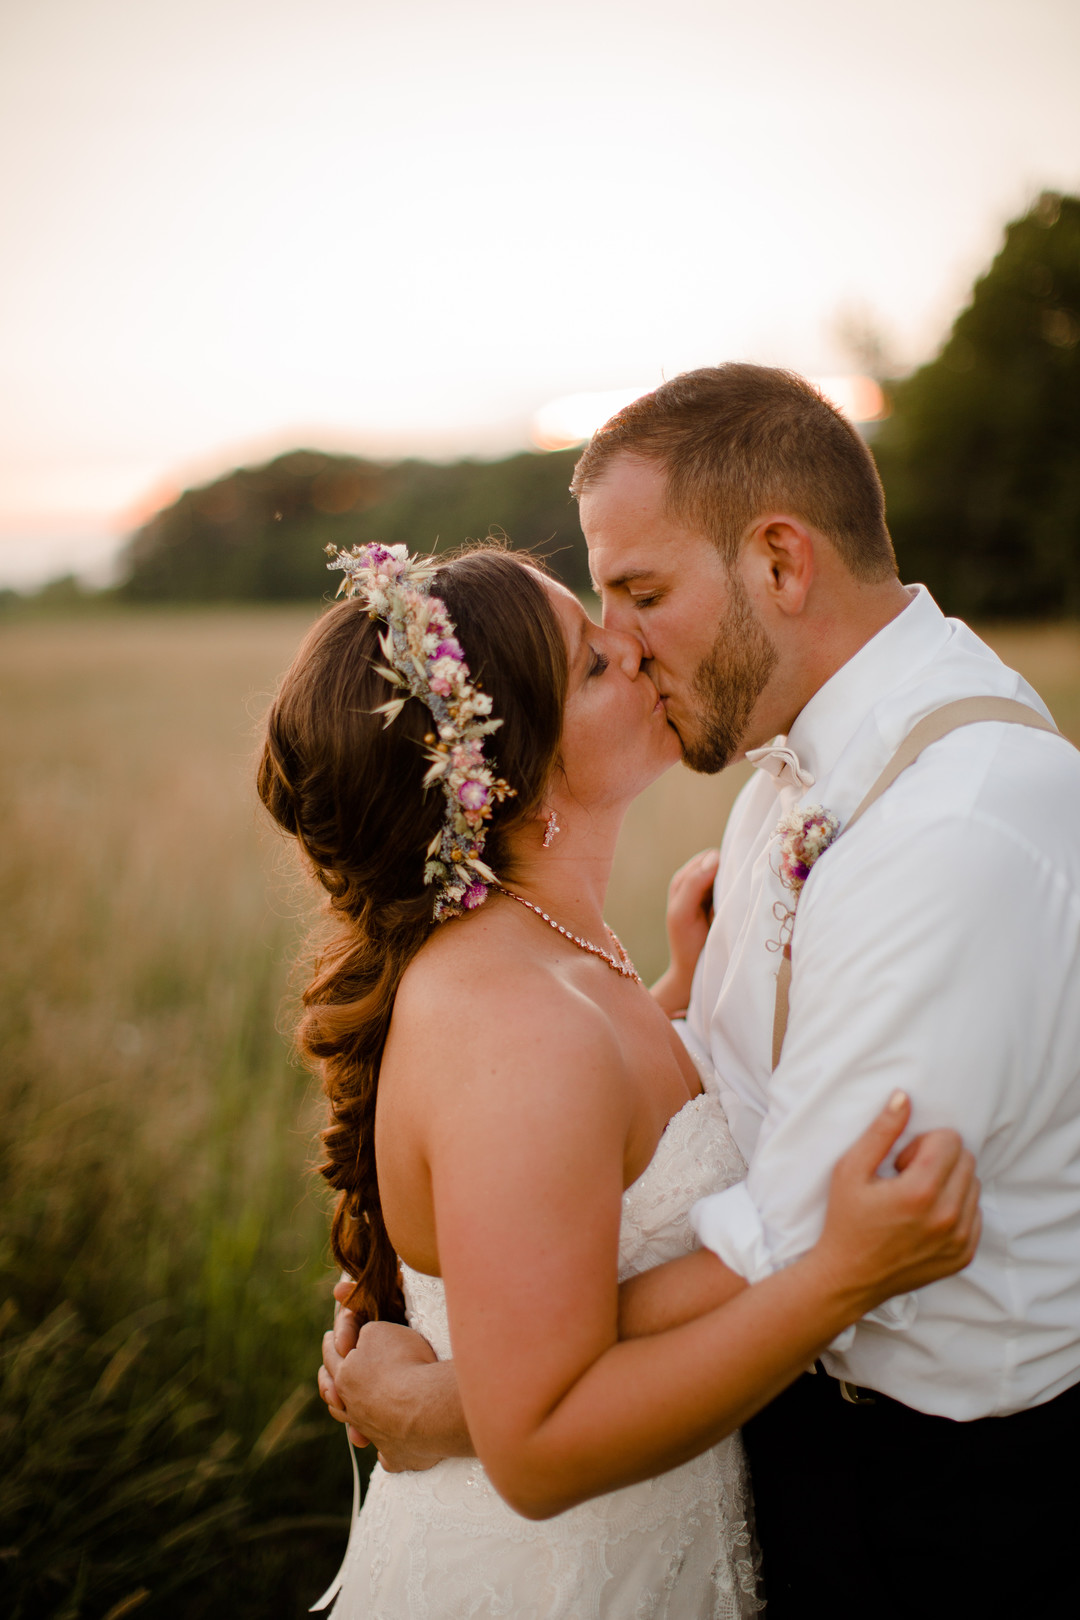 Golden hour wedding photos: Rustic country wedding in Minooka, IL captured by Katie Brsan Photography. Visit CHItheeWED.com for more wedding inspiration!